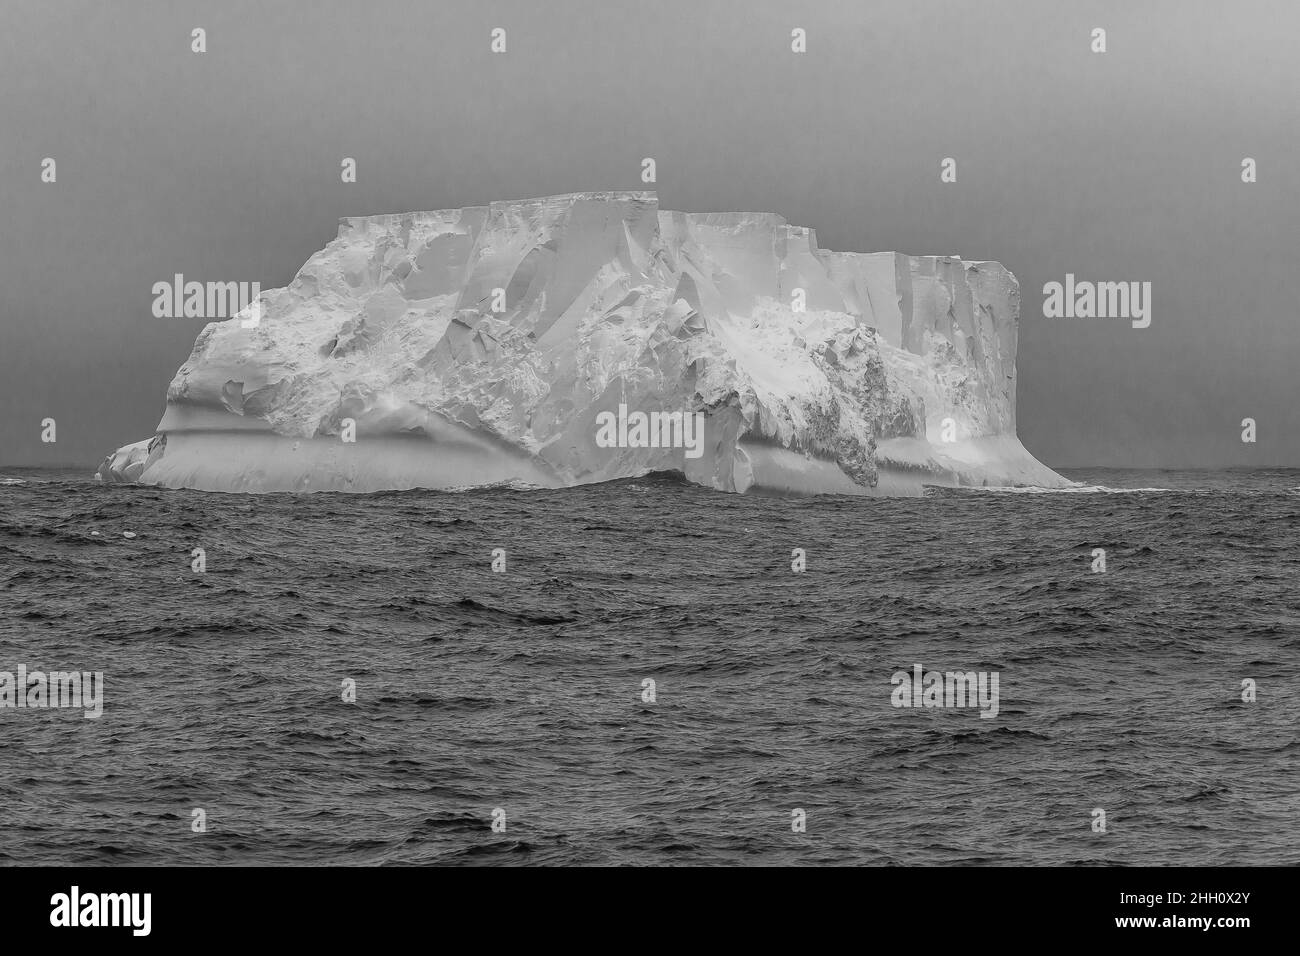 A massive tabular iceberg looms out of the mist having calved from the Mertz or Ninnis glacier. Stock Photo